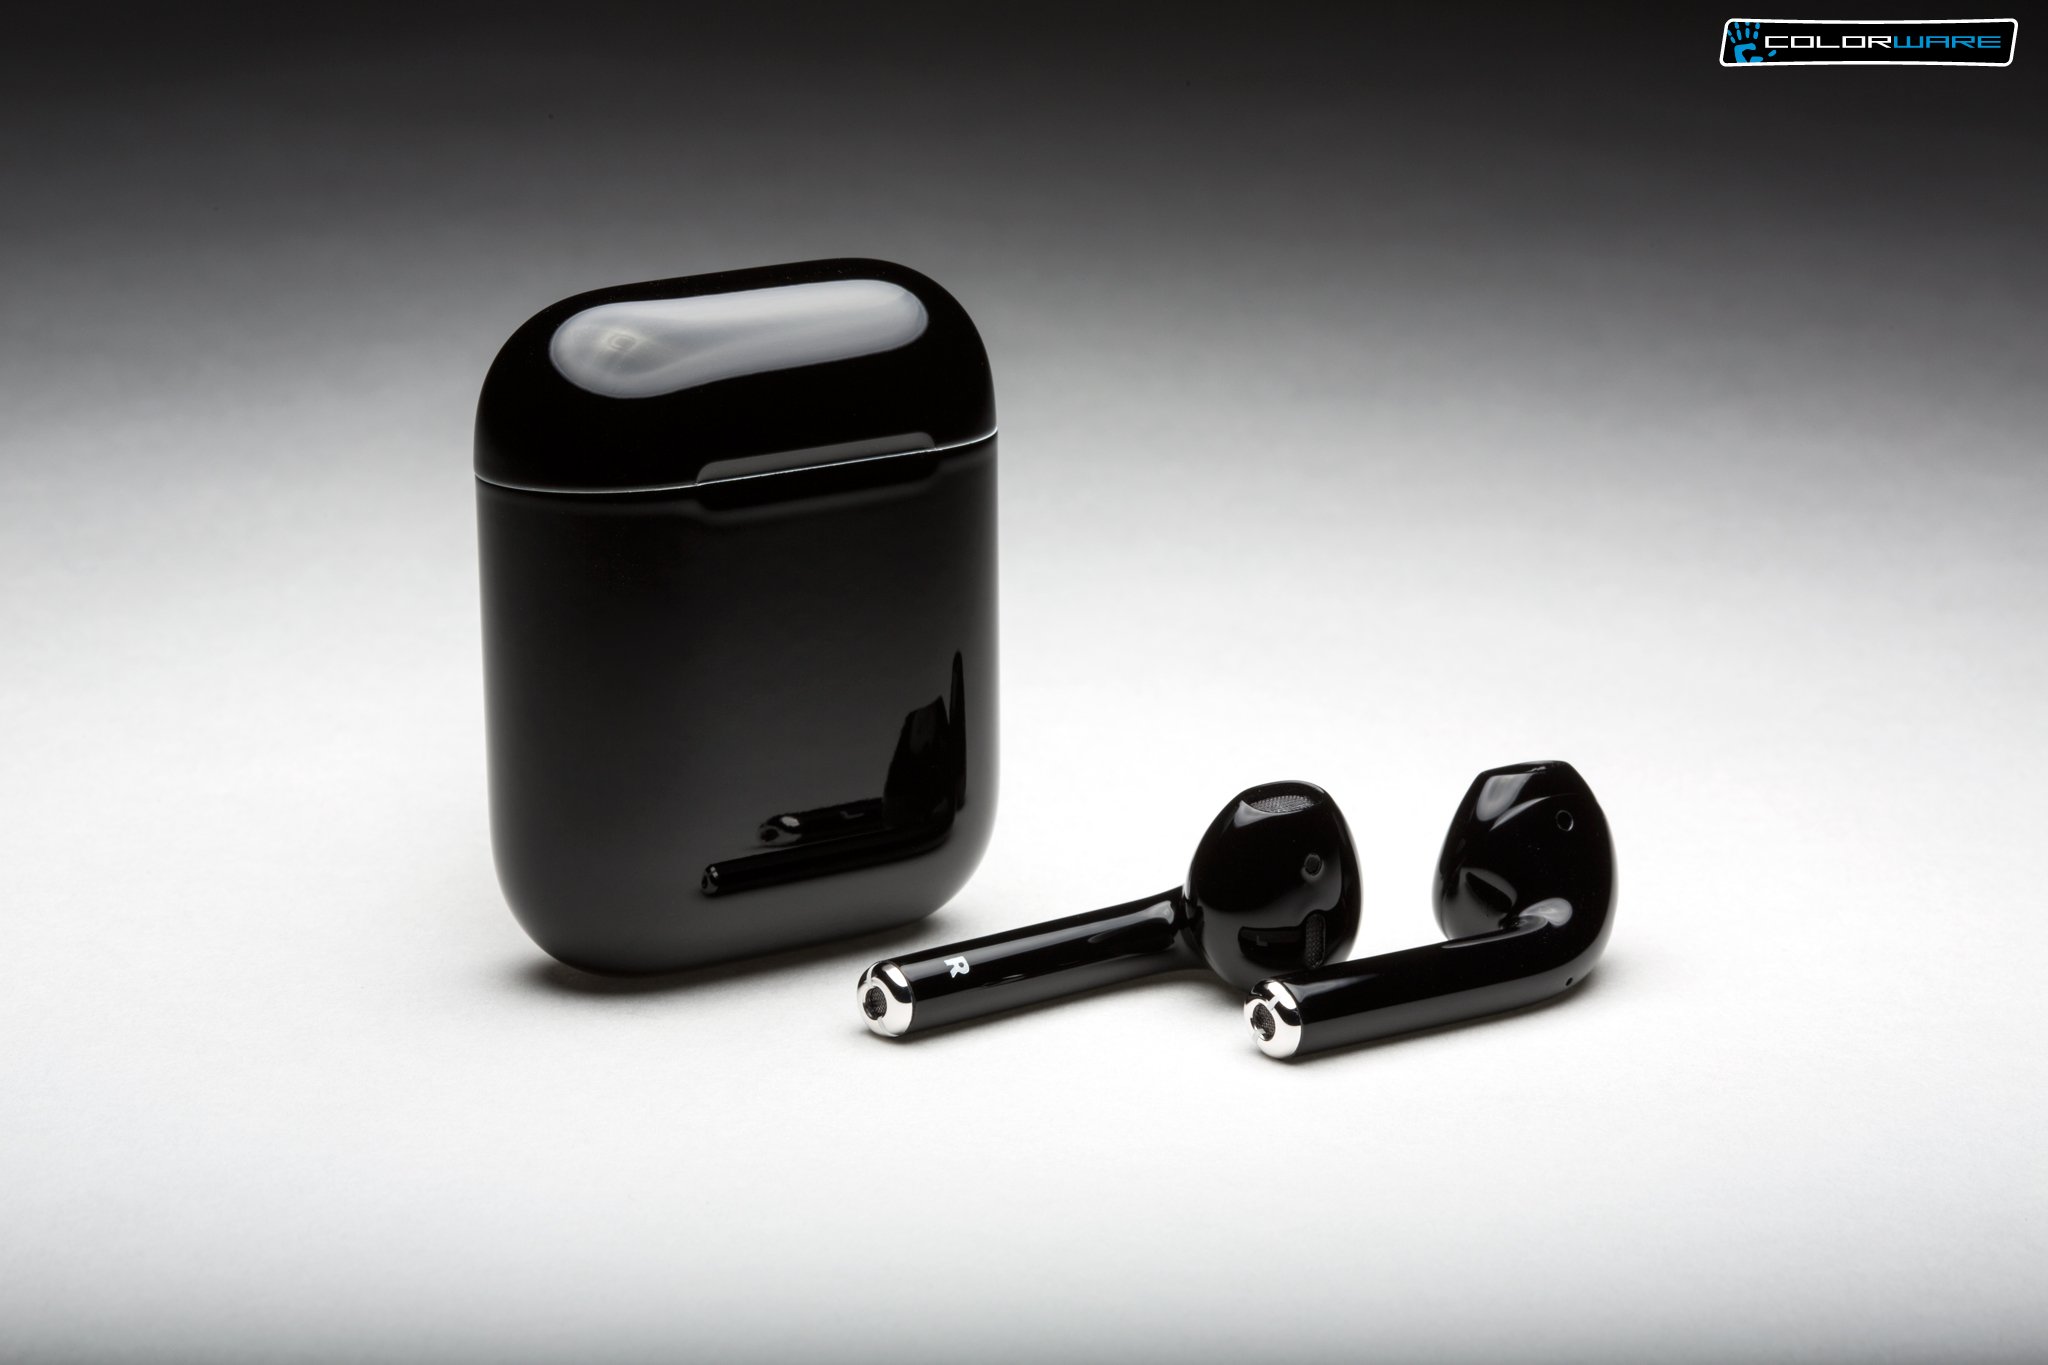 ColorWare on Twitter: "The classic look of Jet Black! #ColorWare #Airpods #JetBlack https://t.co/lbmd1LItvl" /